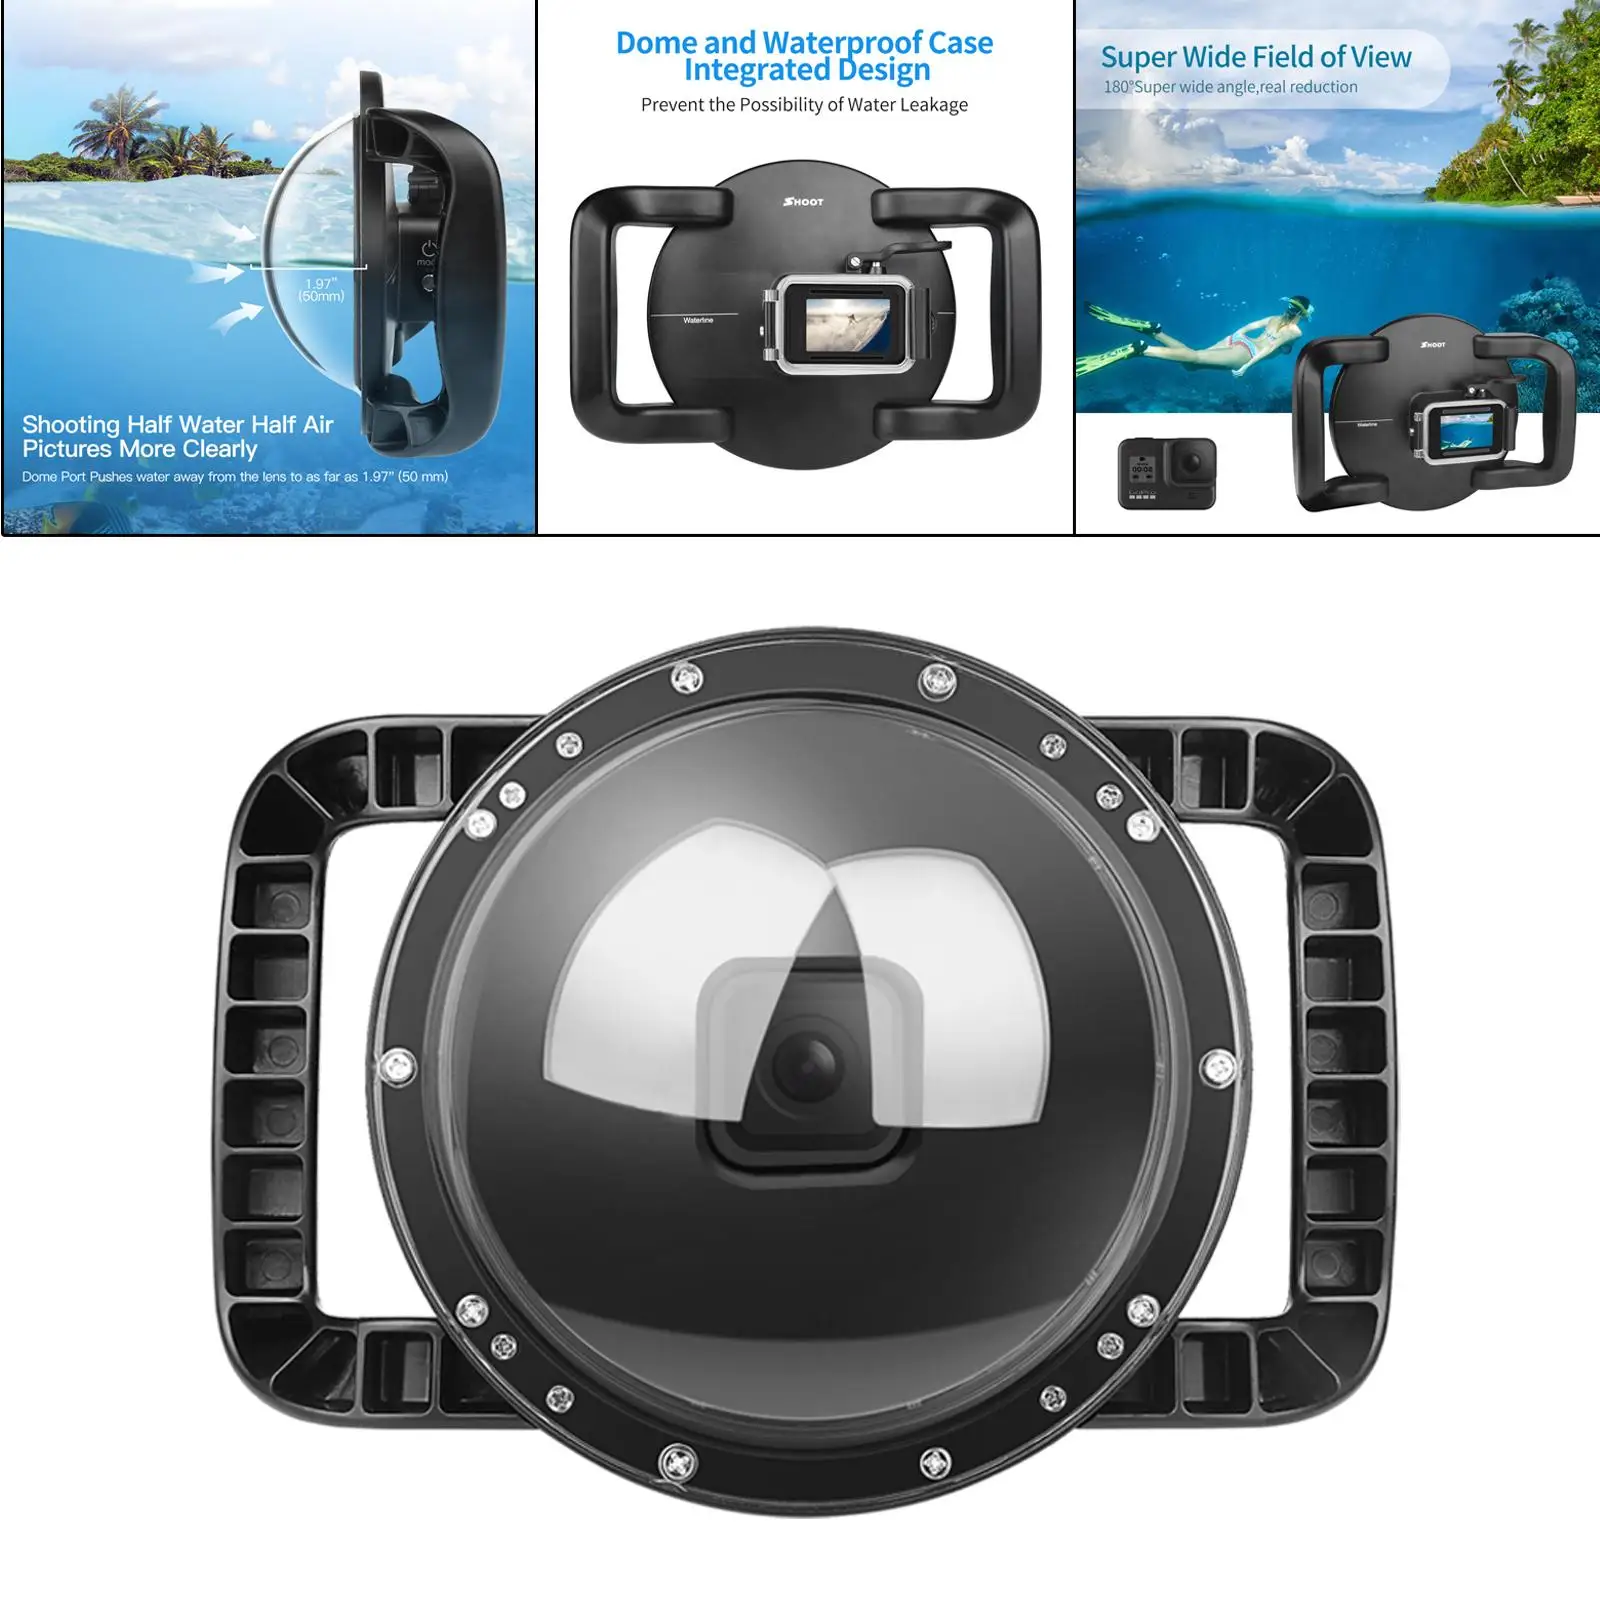 Underwater Dome Lens Waterproof Cover Dual Handle Accessory Black 45M 180 Degree Viewing Angle High Transparent for  Hero 8